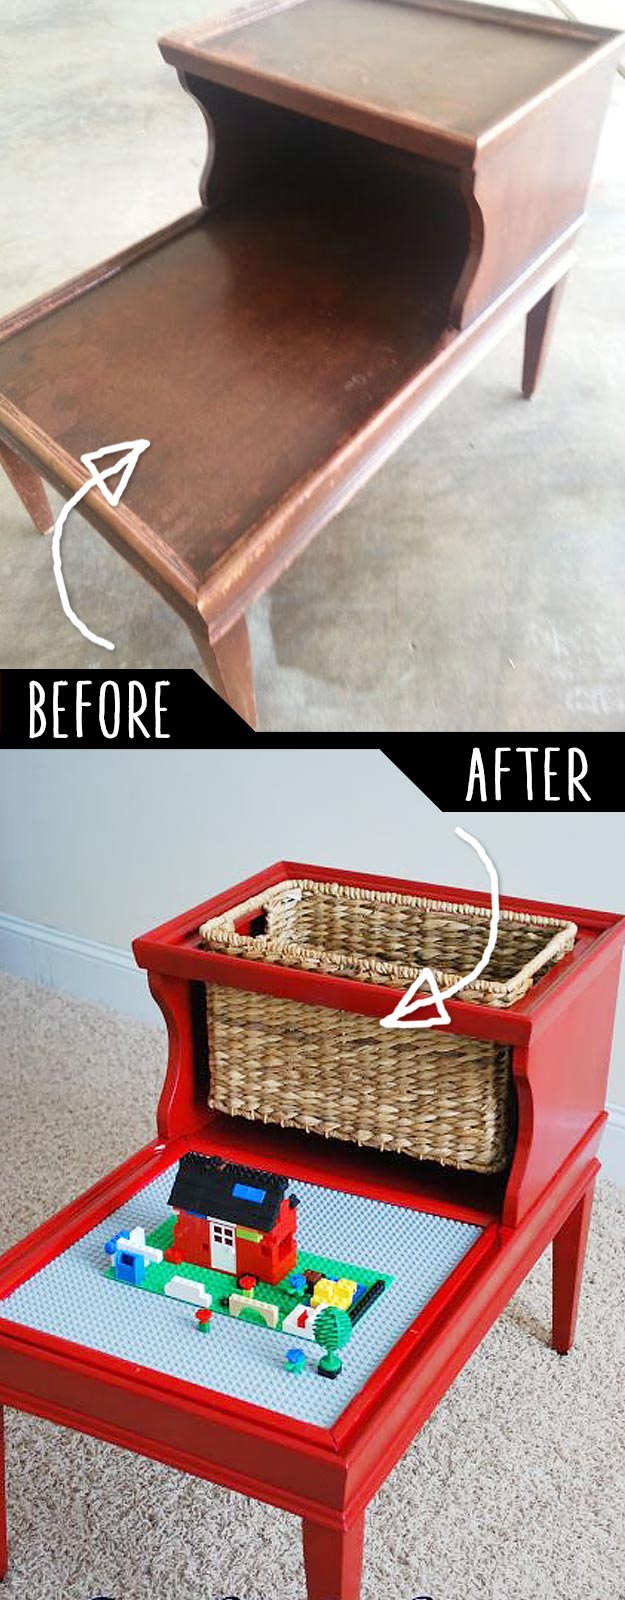 DIY Furniture Hacks | An Old Table into Kids Lego Table | Cool Ideas for Creative Do It Yourself Furniture Made From Things You Might Not Expect - http://diyjoy.com/diy-furniture-hacks